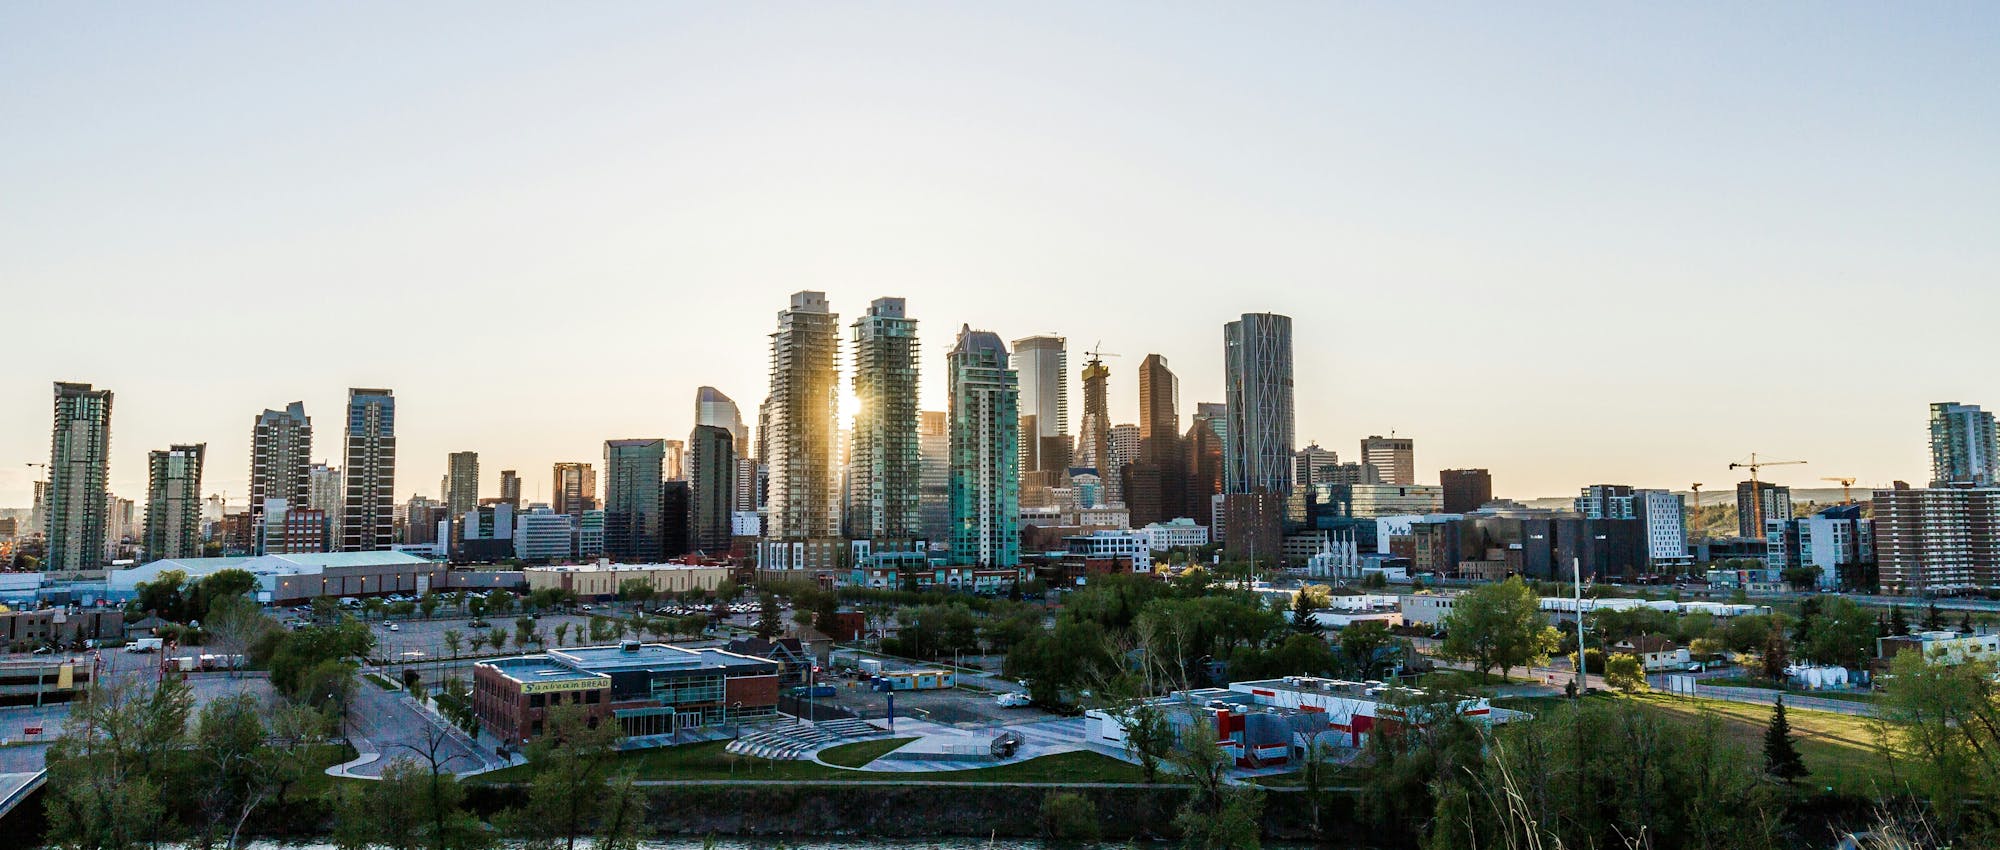 Wide-angle photo of the Calgary skyline with evening light reflecting off the towers.